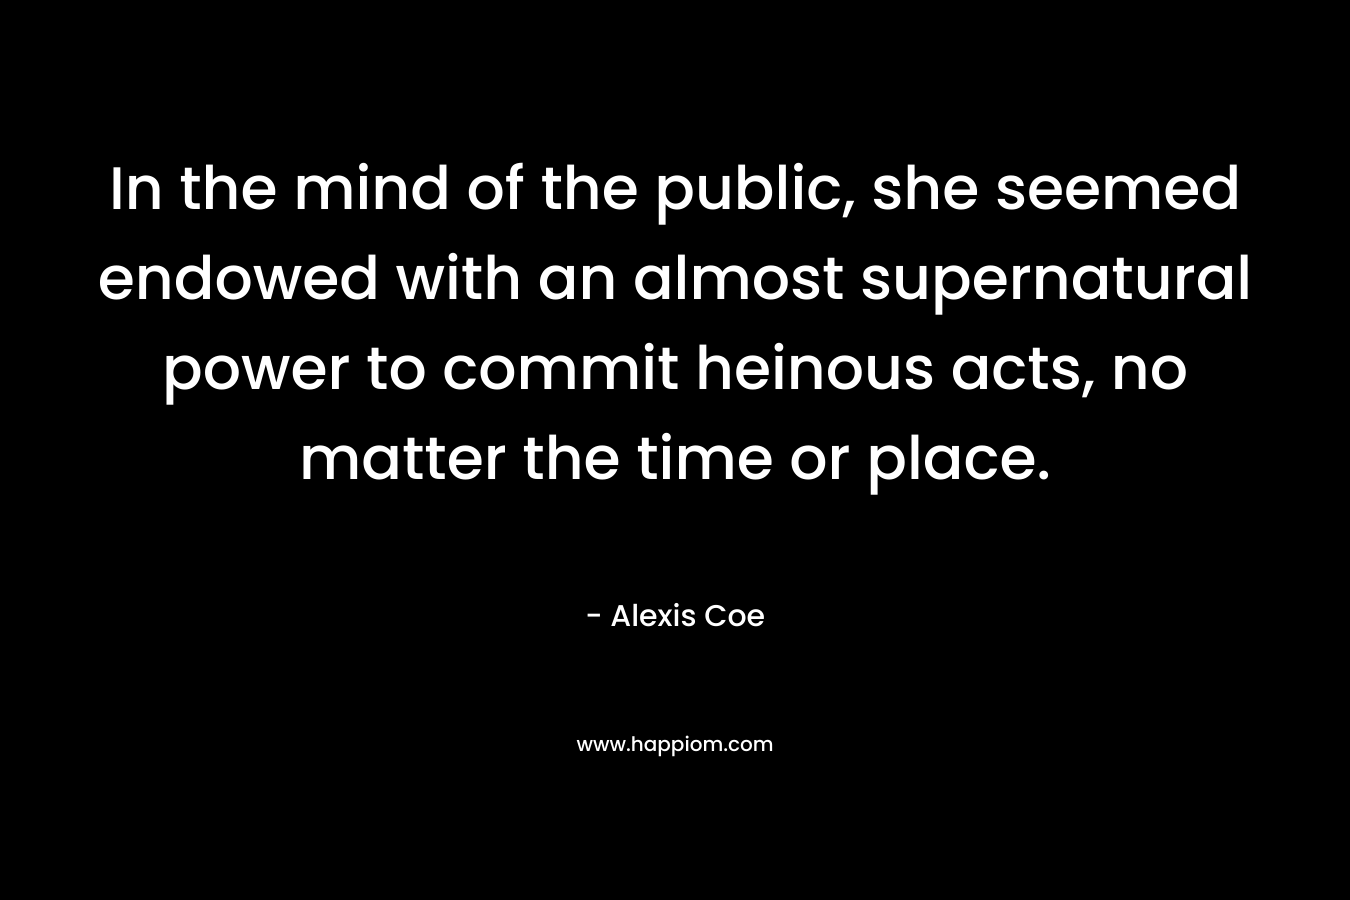 In the mind of the public, she seemed endowed with an almost supernatural power to commit heinous acts, no matter the time or place. – Alexis Coe